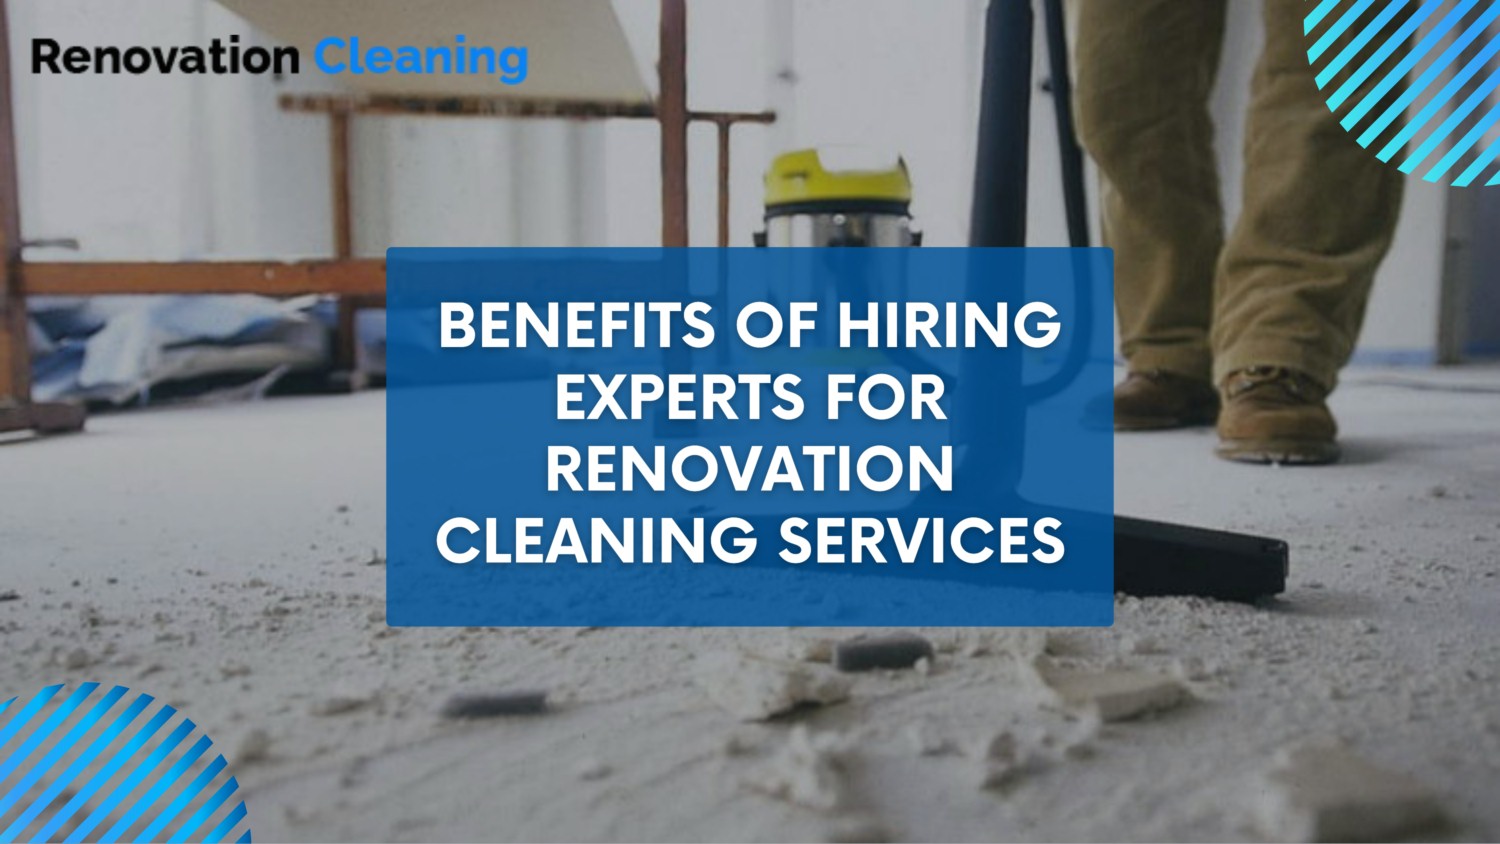 Benefits of Hiring Experts for Renovation Cleaning Services